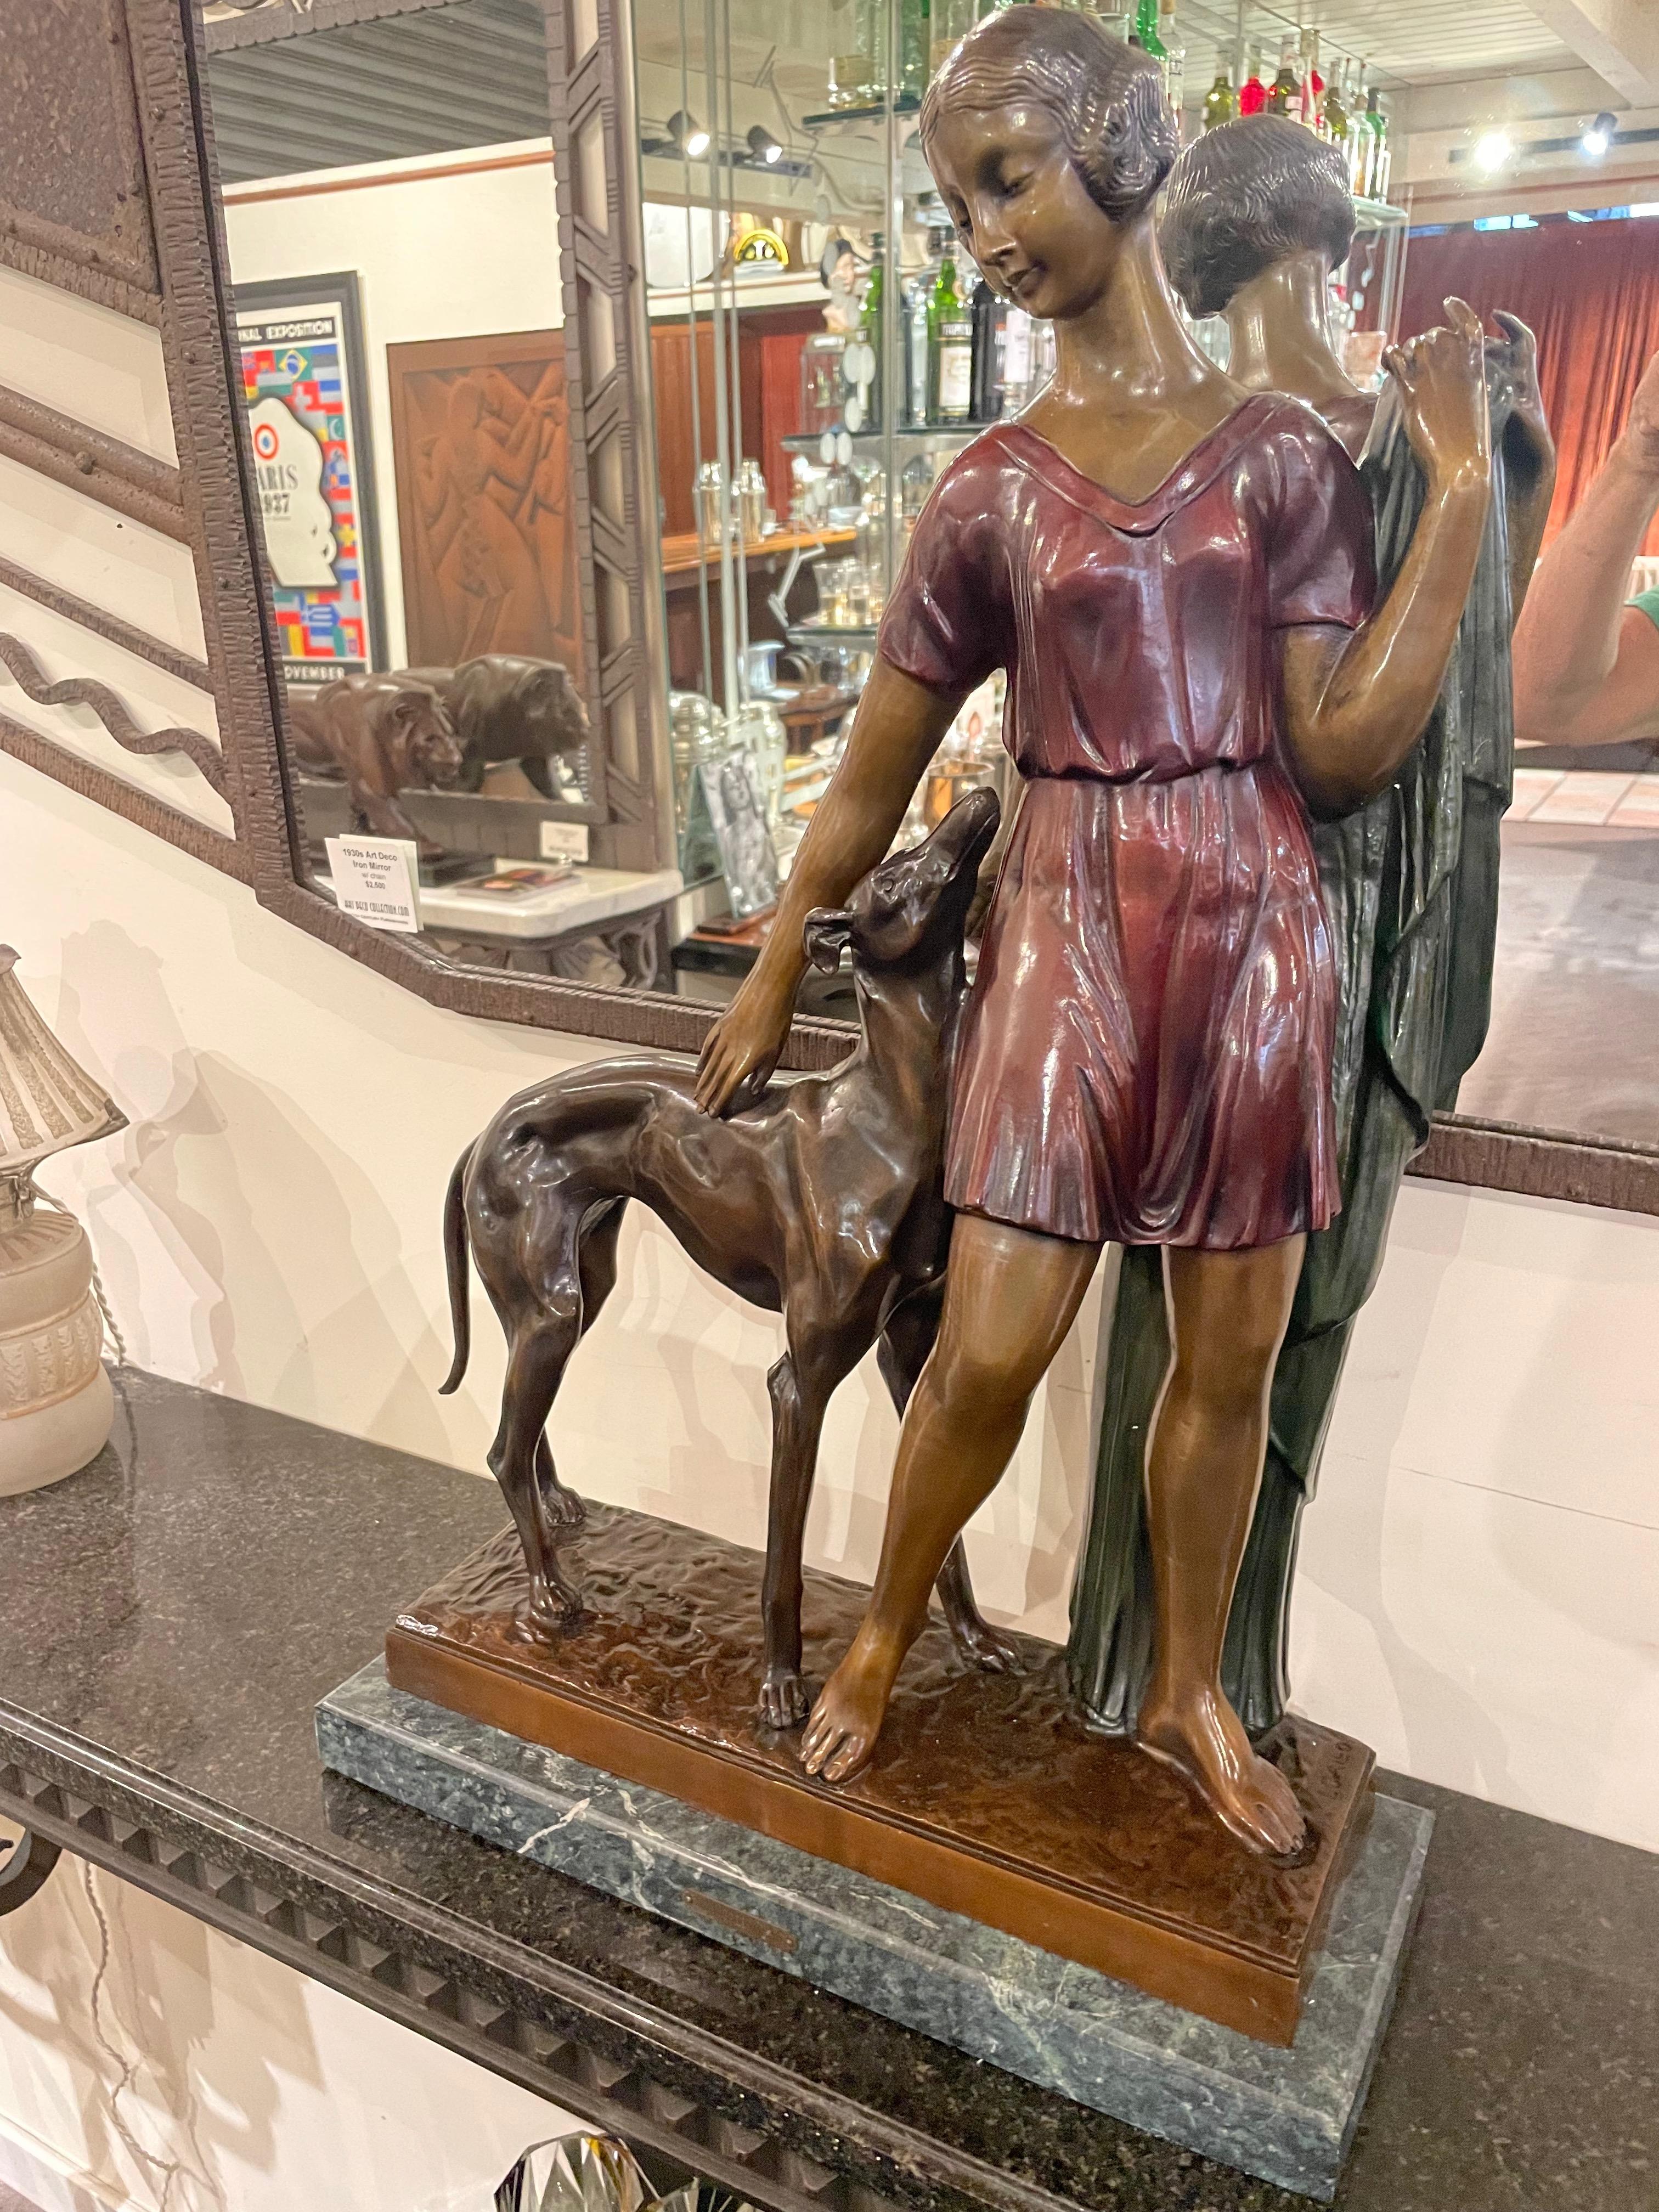 Iconic, large-scale bronze sculpture by Spanish artist Ignacio Gallo depicting a sleek Art Deco woman…with an even “sleeker” Greyhound dog looking adoringly at his owner “Girl with Greyhound”. It is a graceful pose, beautifully rendered. The base is